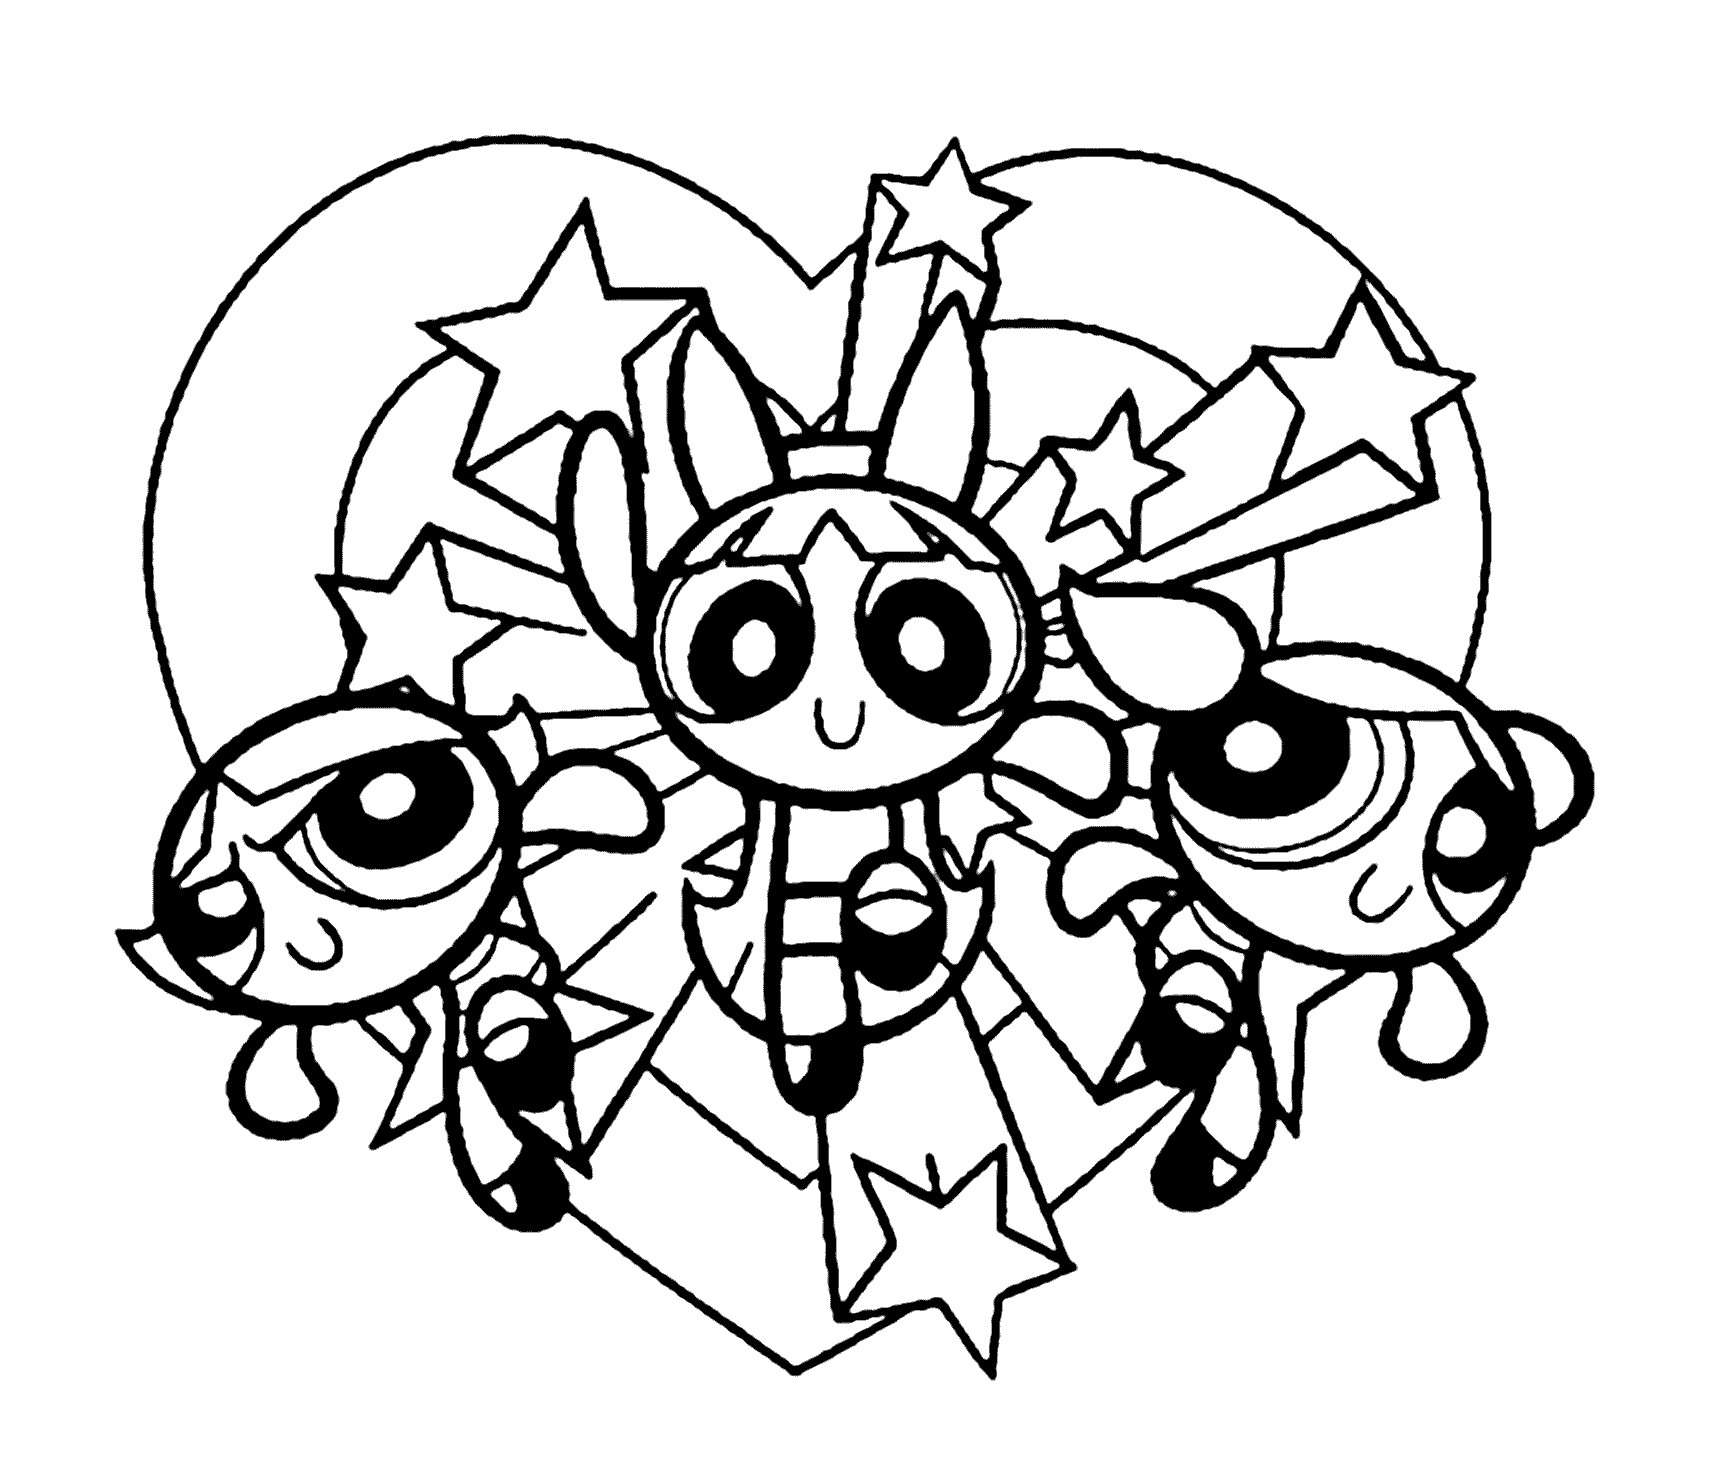 Powderpuff Girls Coloring Pages
 12 printable pictures of powerpuff girls page Print